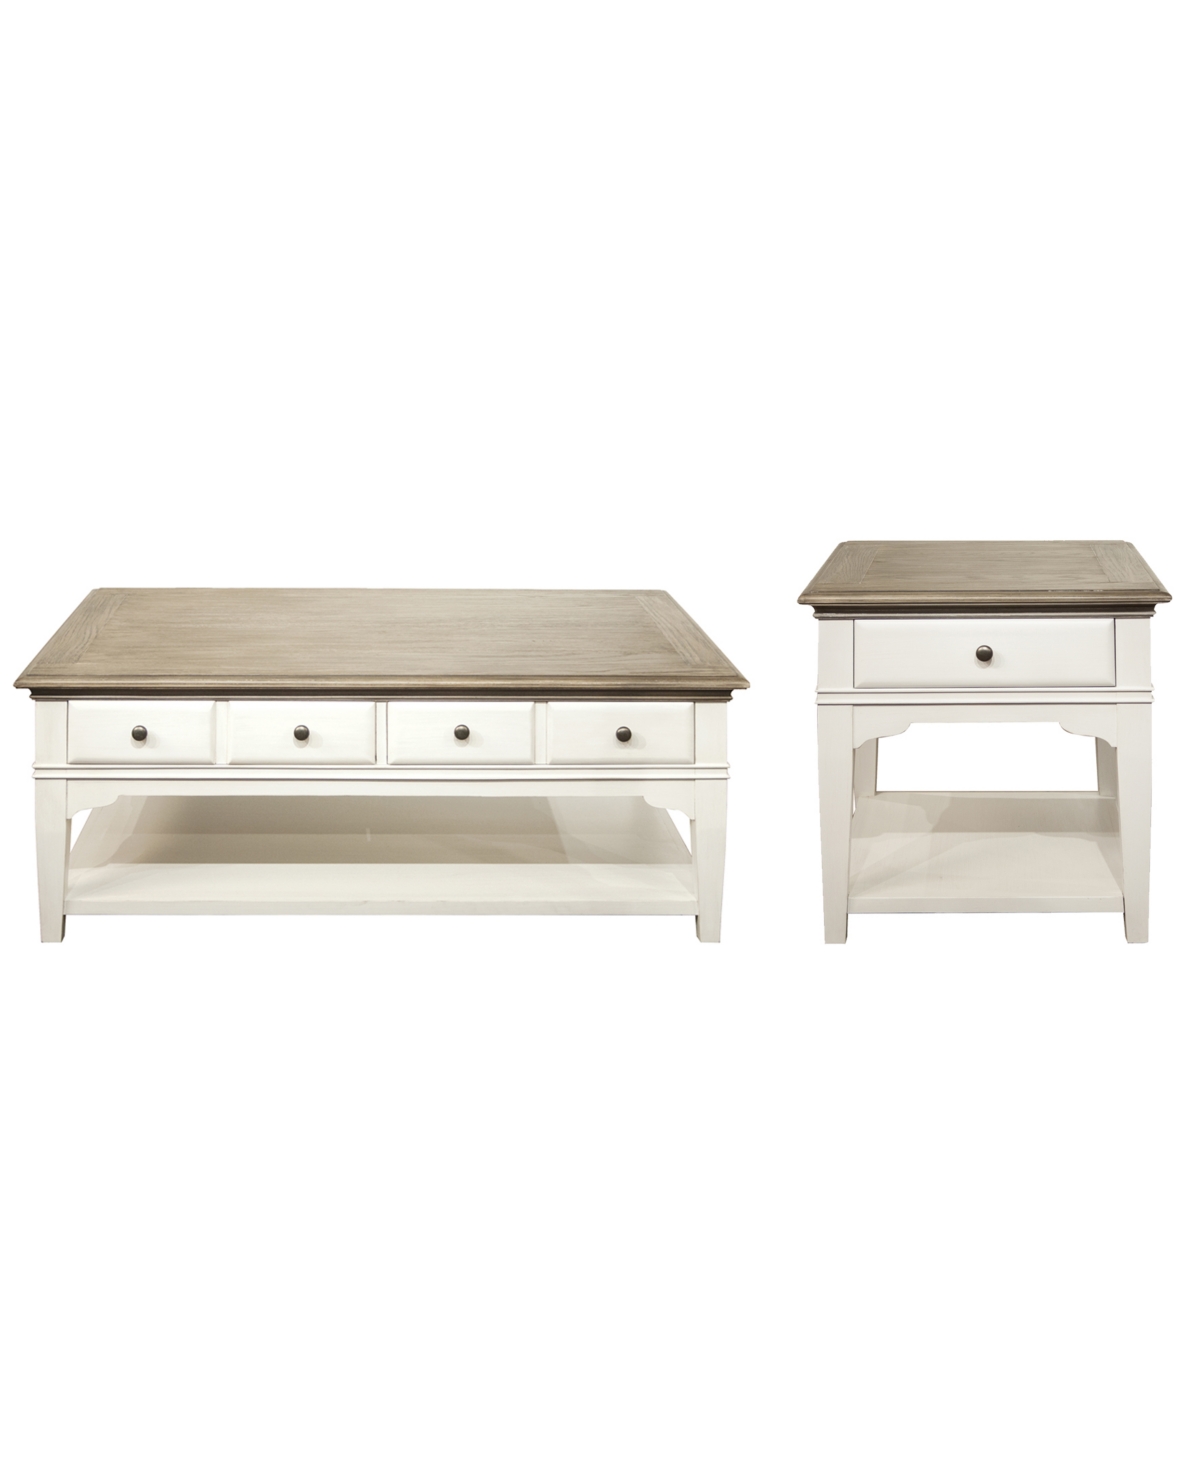 Macy's Myra Leg Cocktail Table And Leg End Table Set In Natural,paperwhite